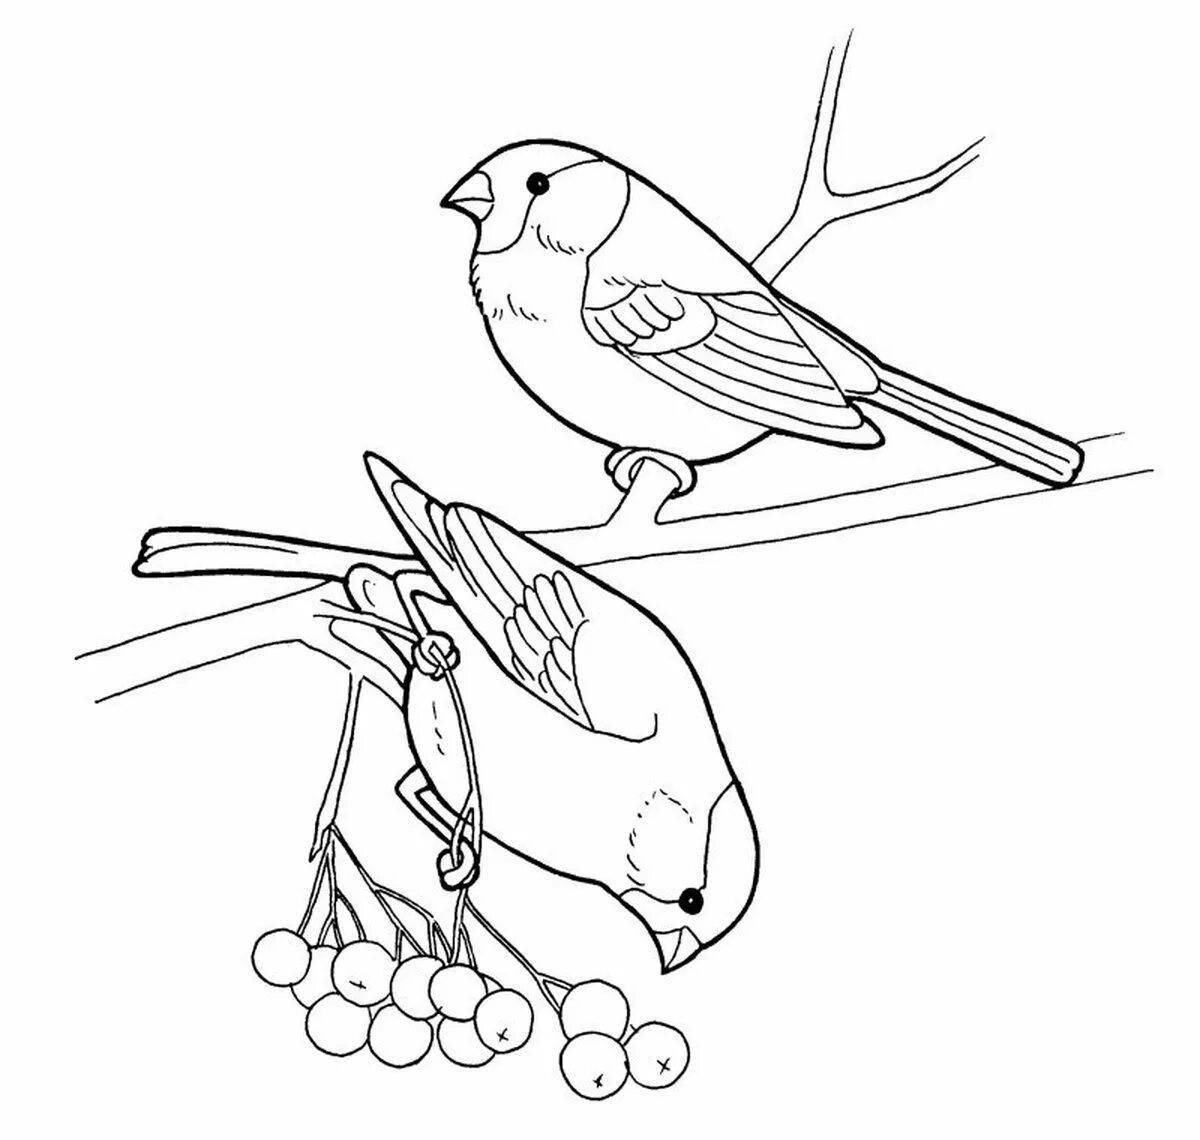 Coloring book great tit and bullfinch